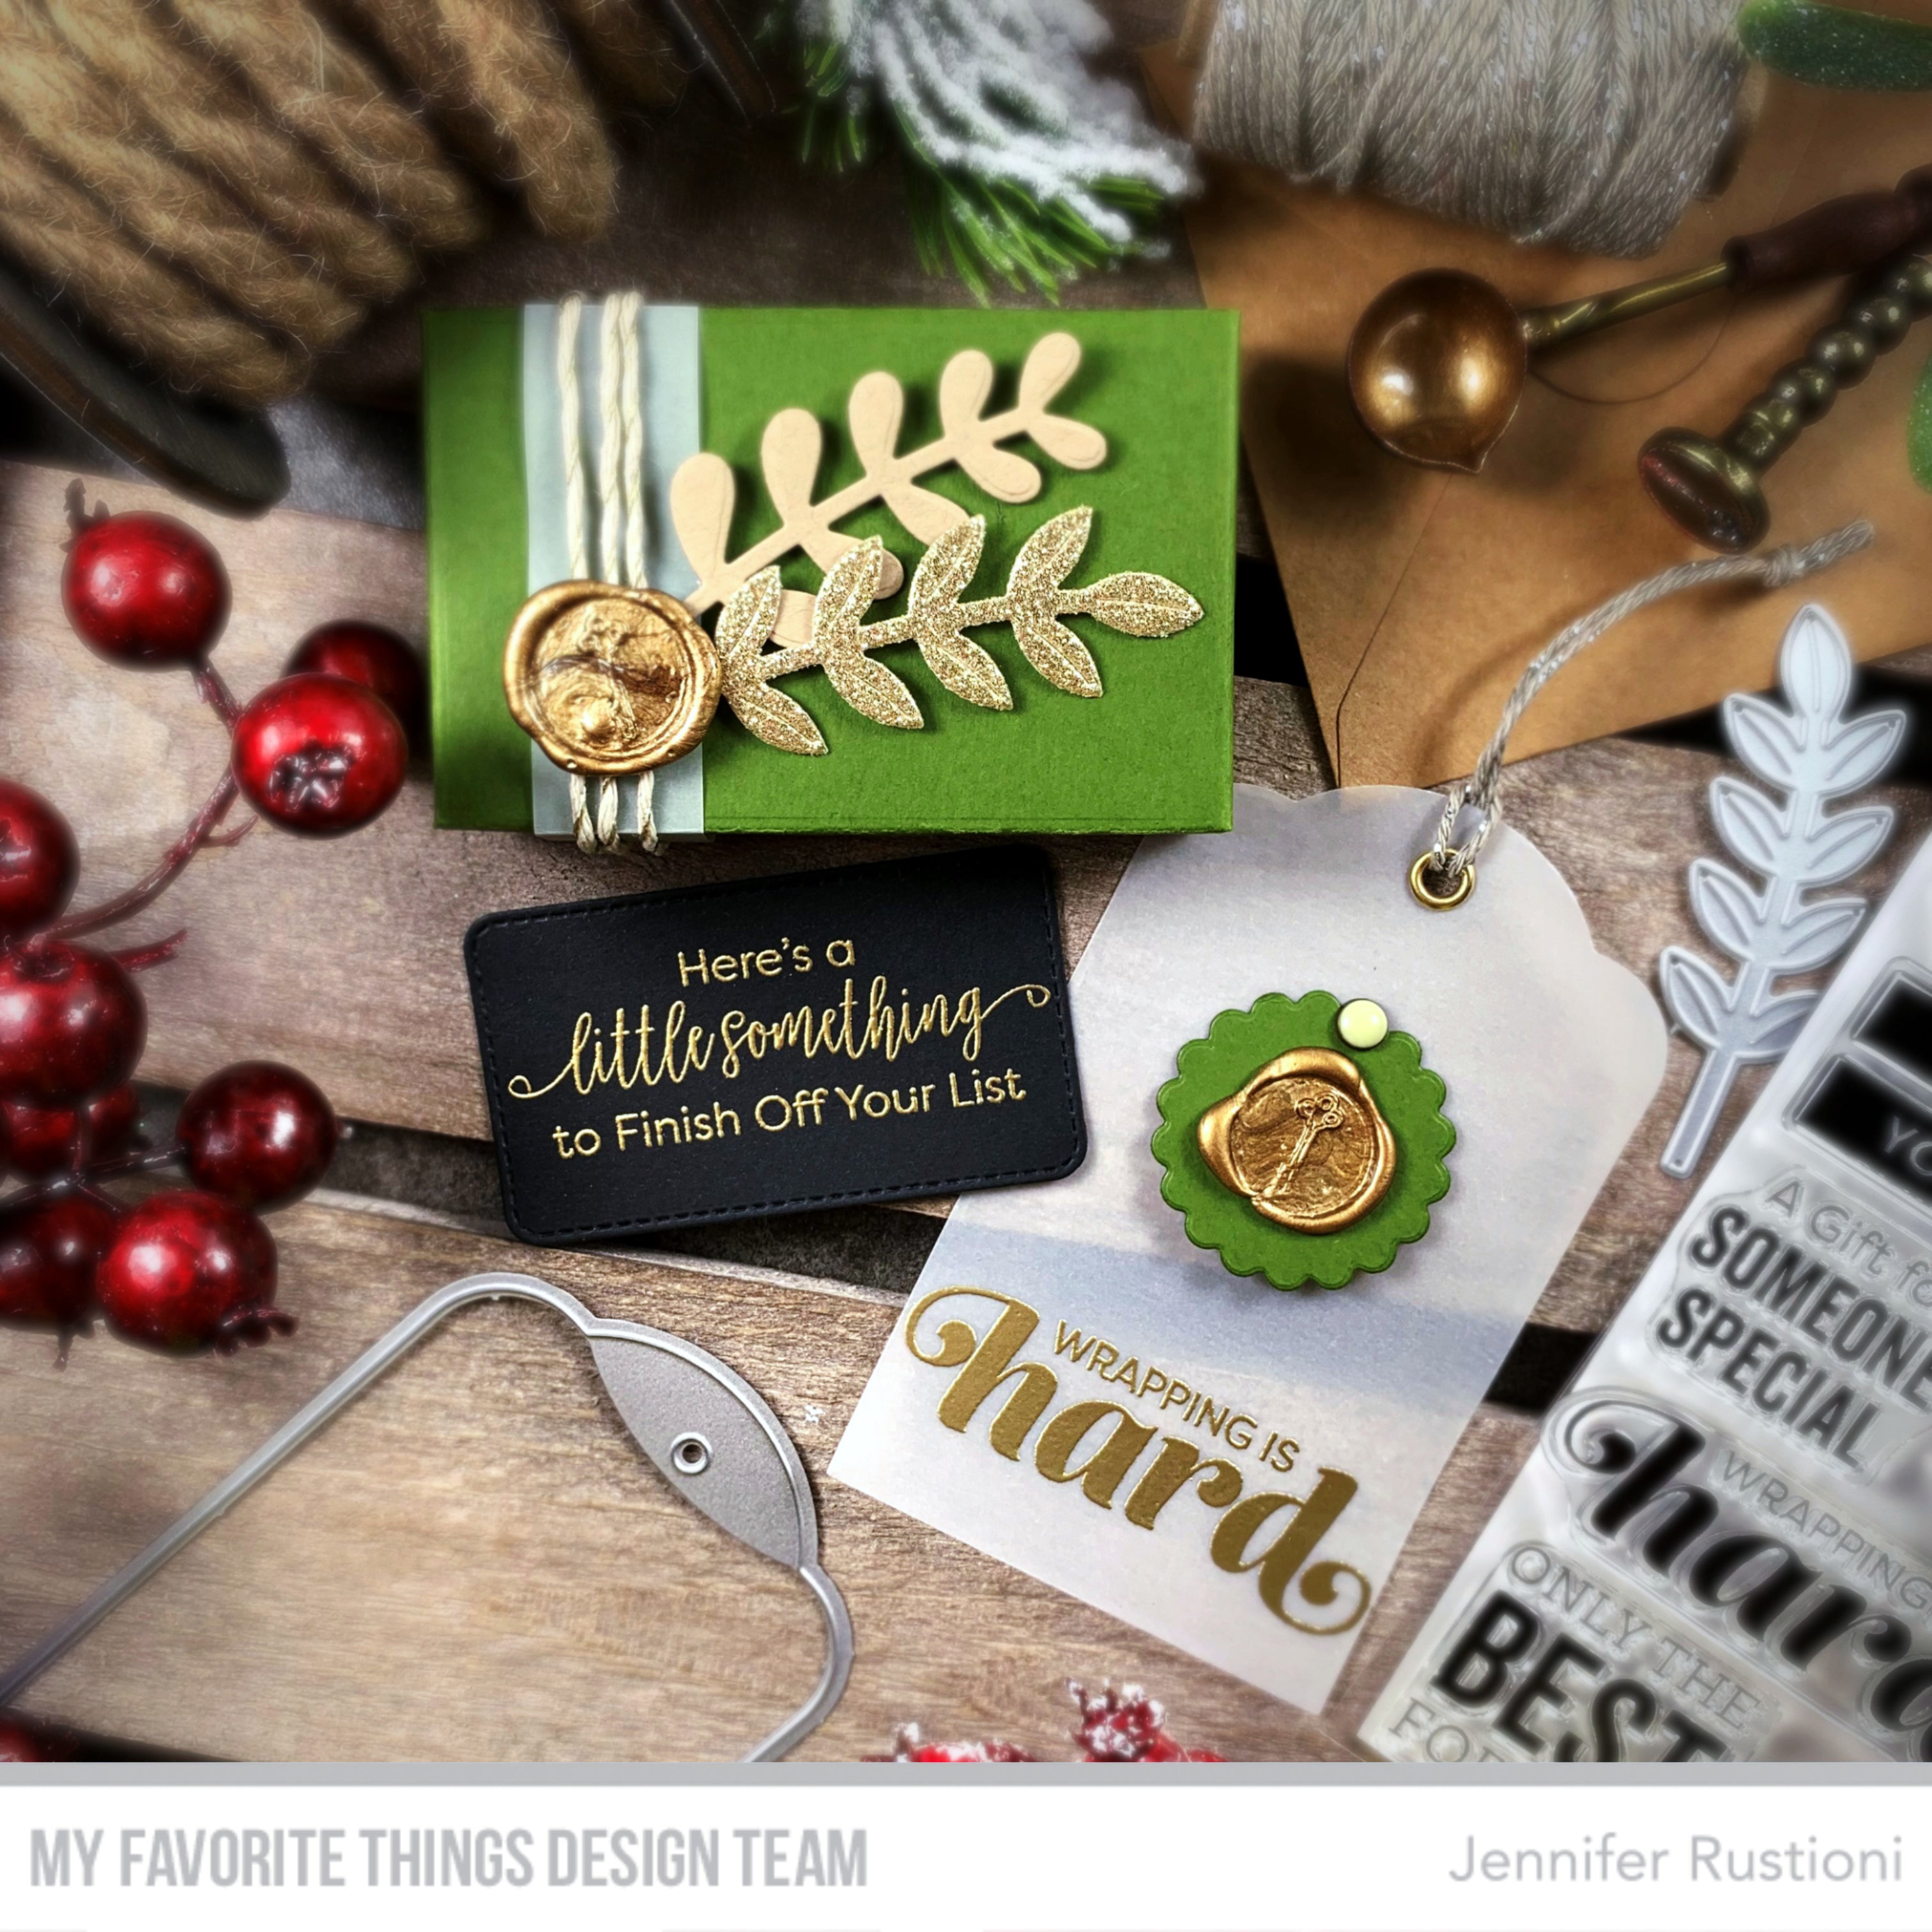 Handmade tags from Jennifer Rustioni featuring products from My Favorite Things #mftstamps